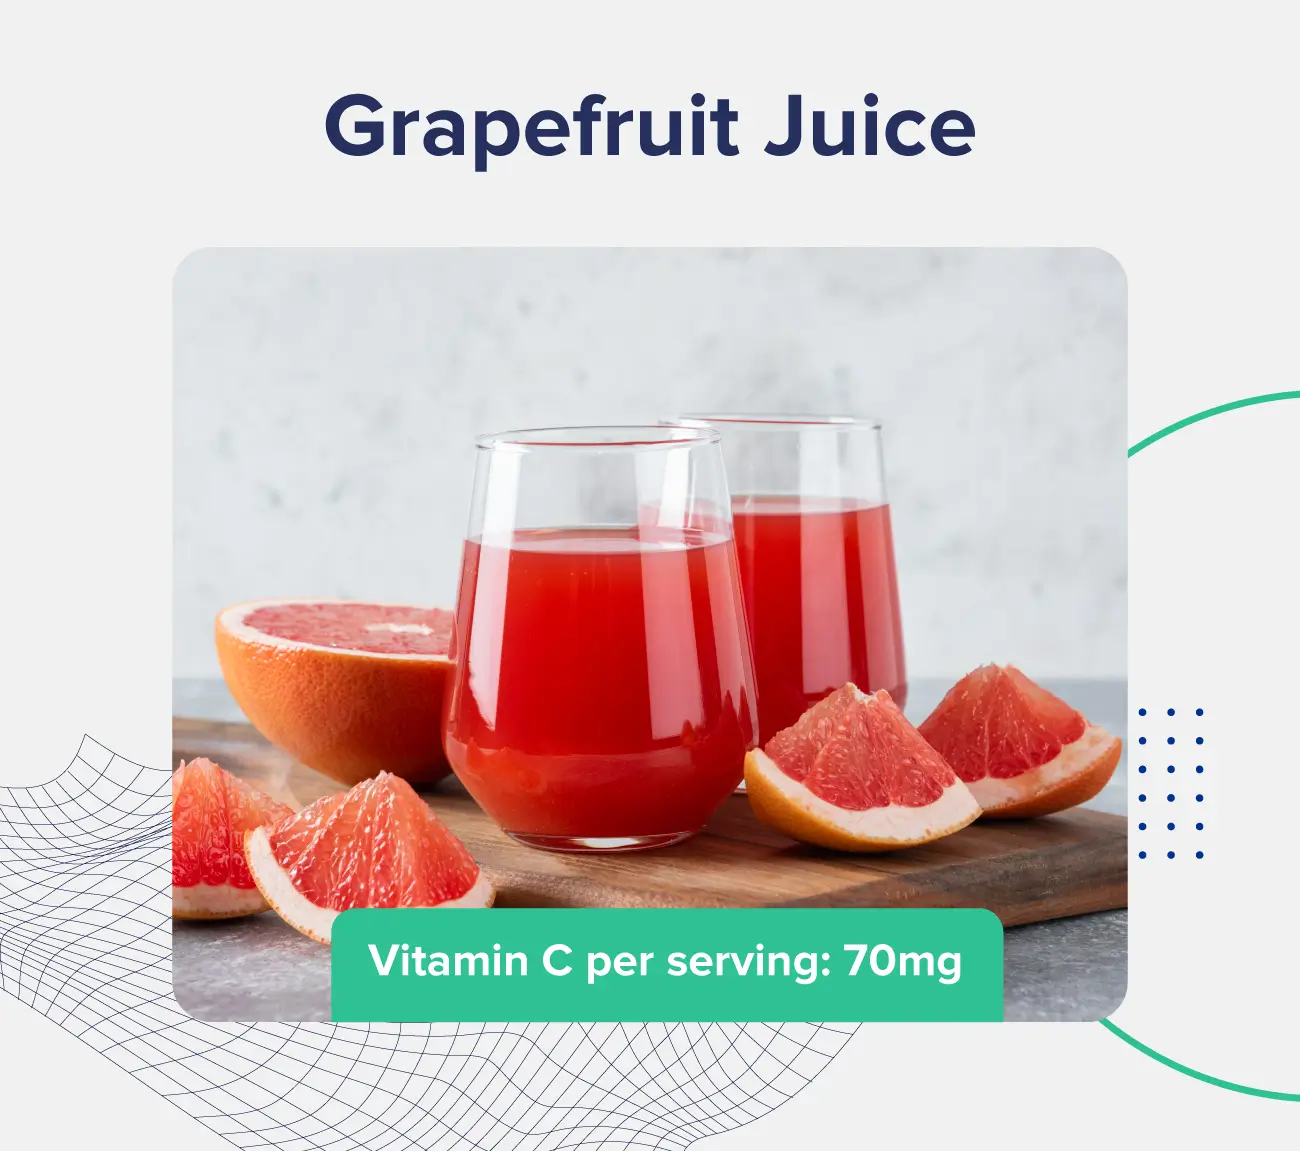 A graphic entitled "Grapefruit Juice" depicting several glasses of grapefruit juice surrounded by slices of grapefruit and listing the vitamin C content (70 milligrams per serving).